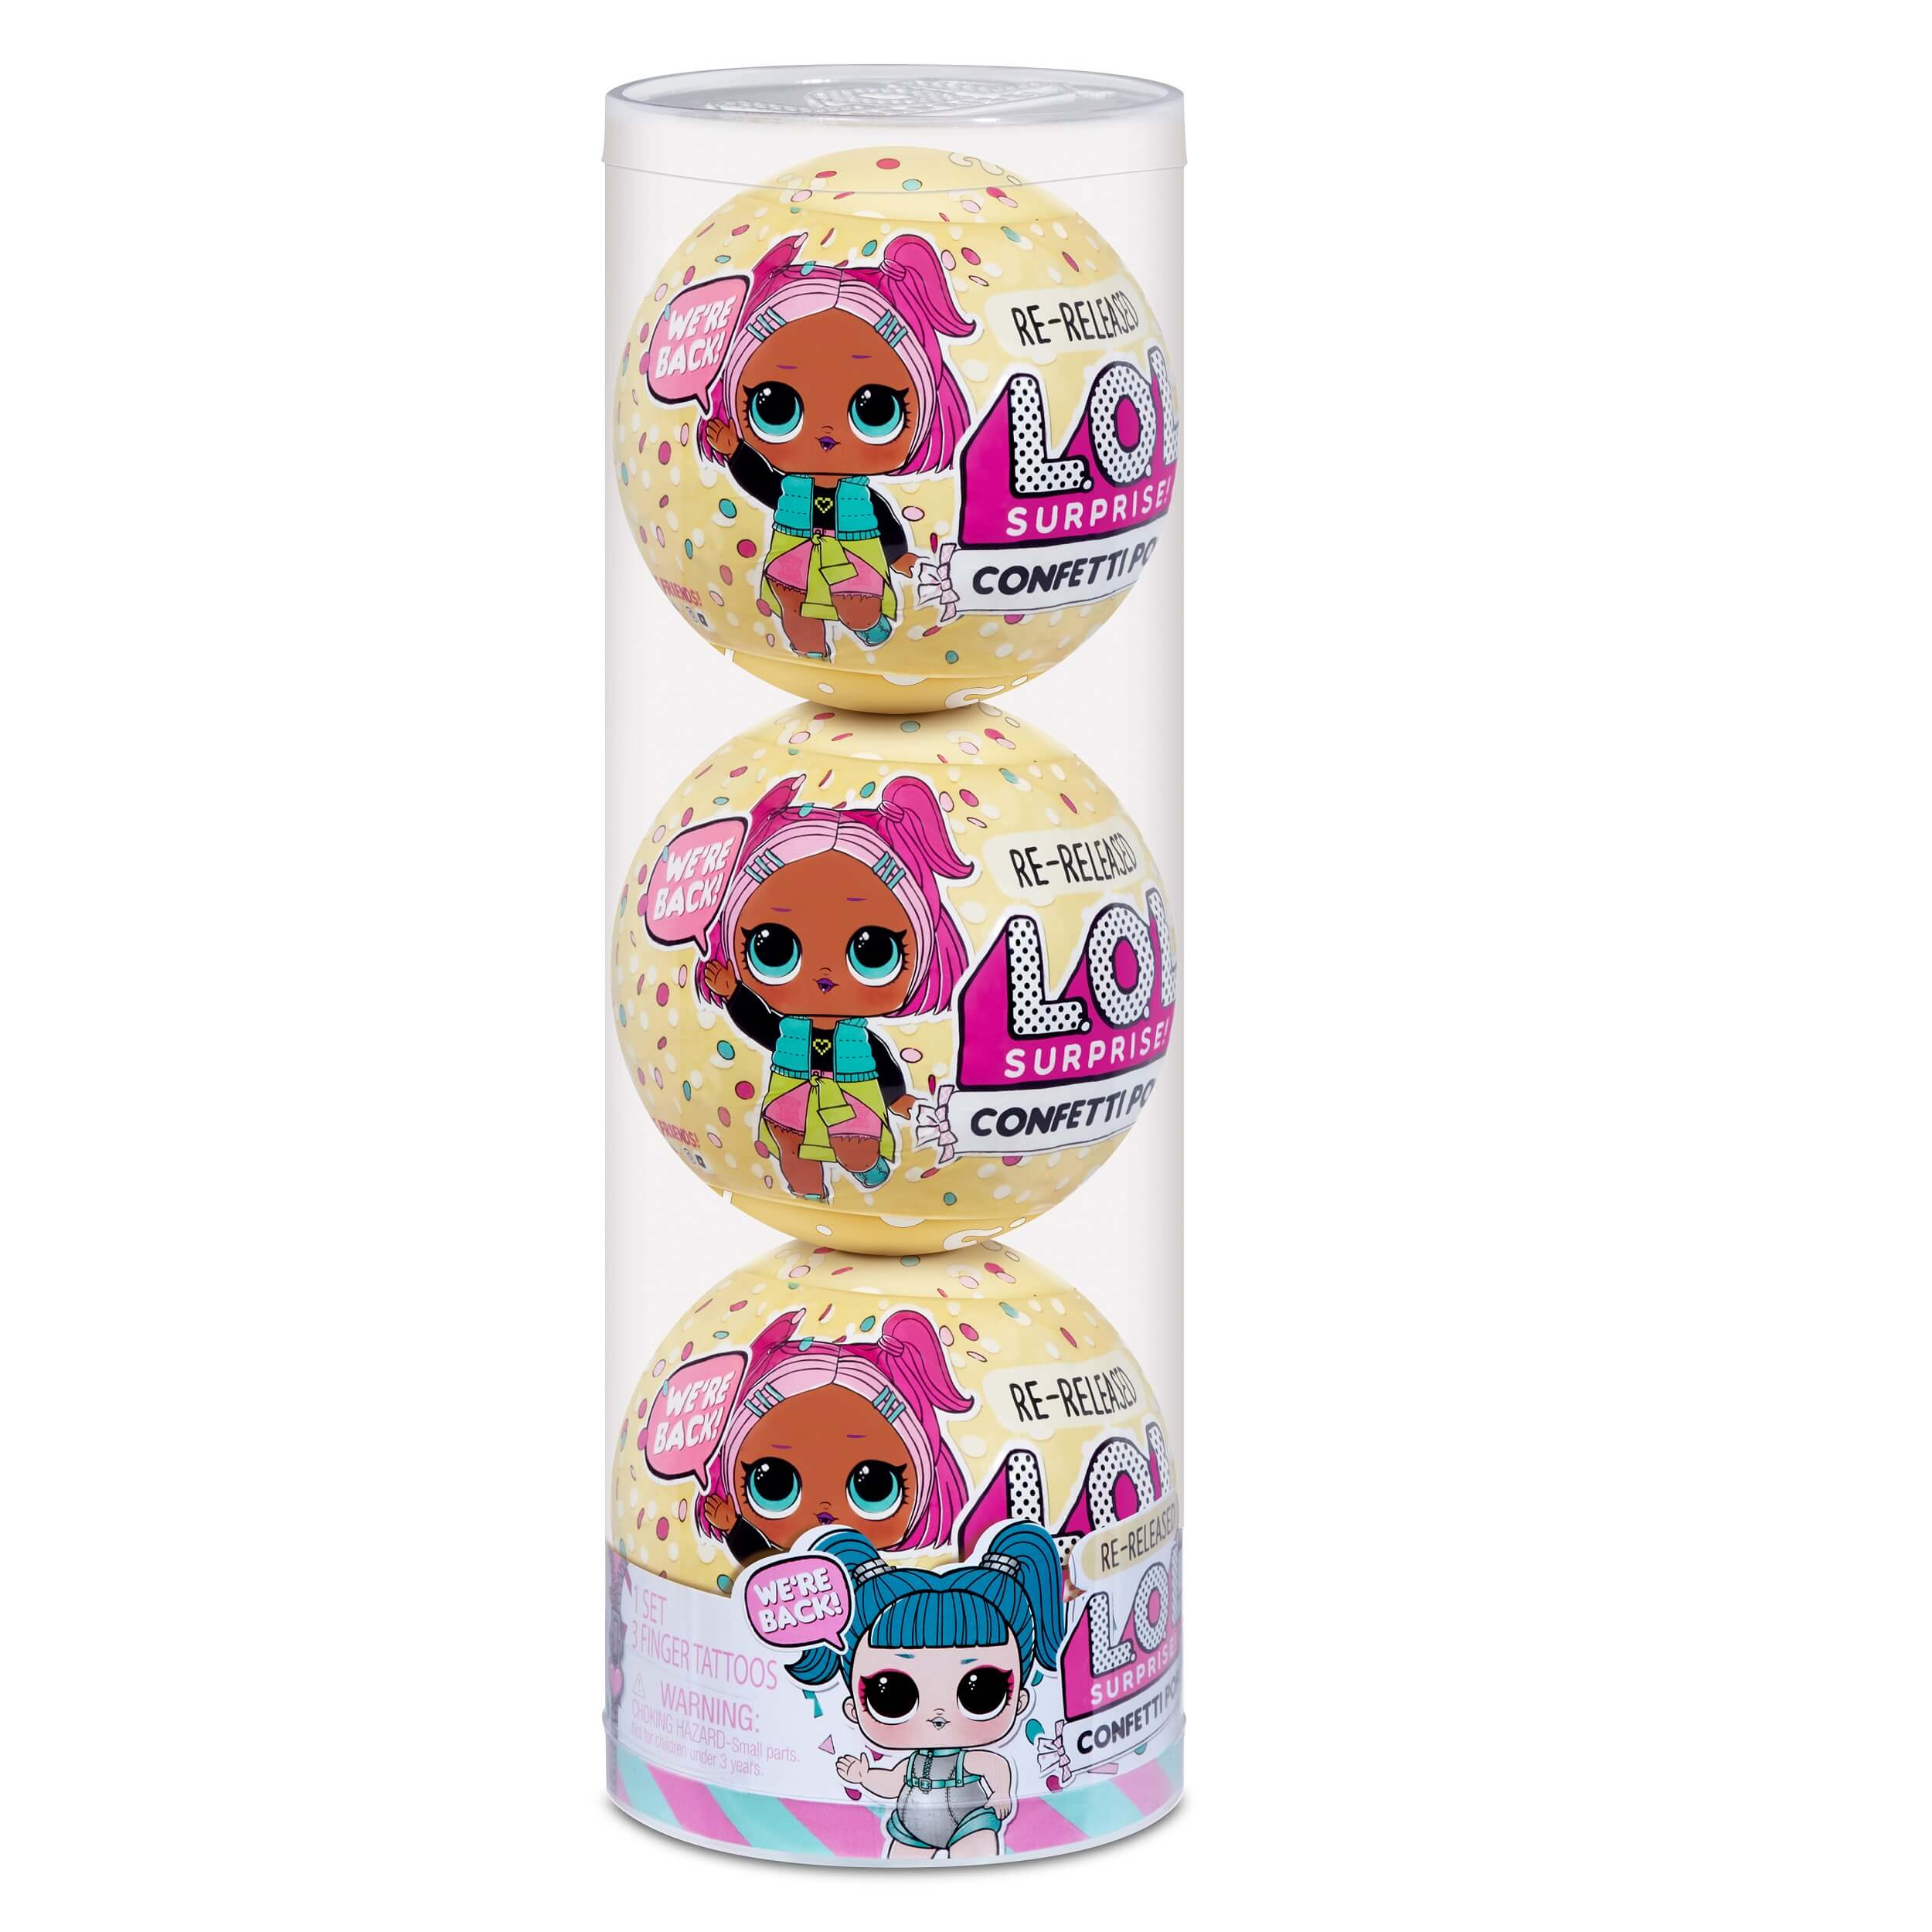 Confetti Pop 3 Pack Glamstronaut Released Doll – The MGA Shop